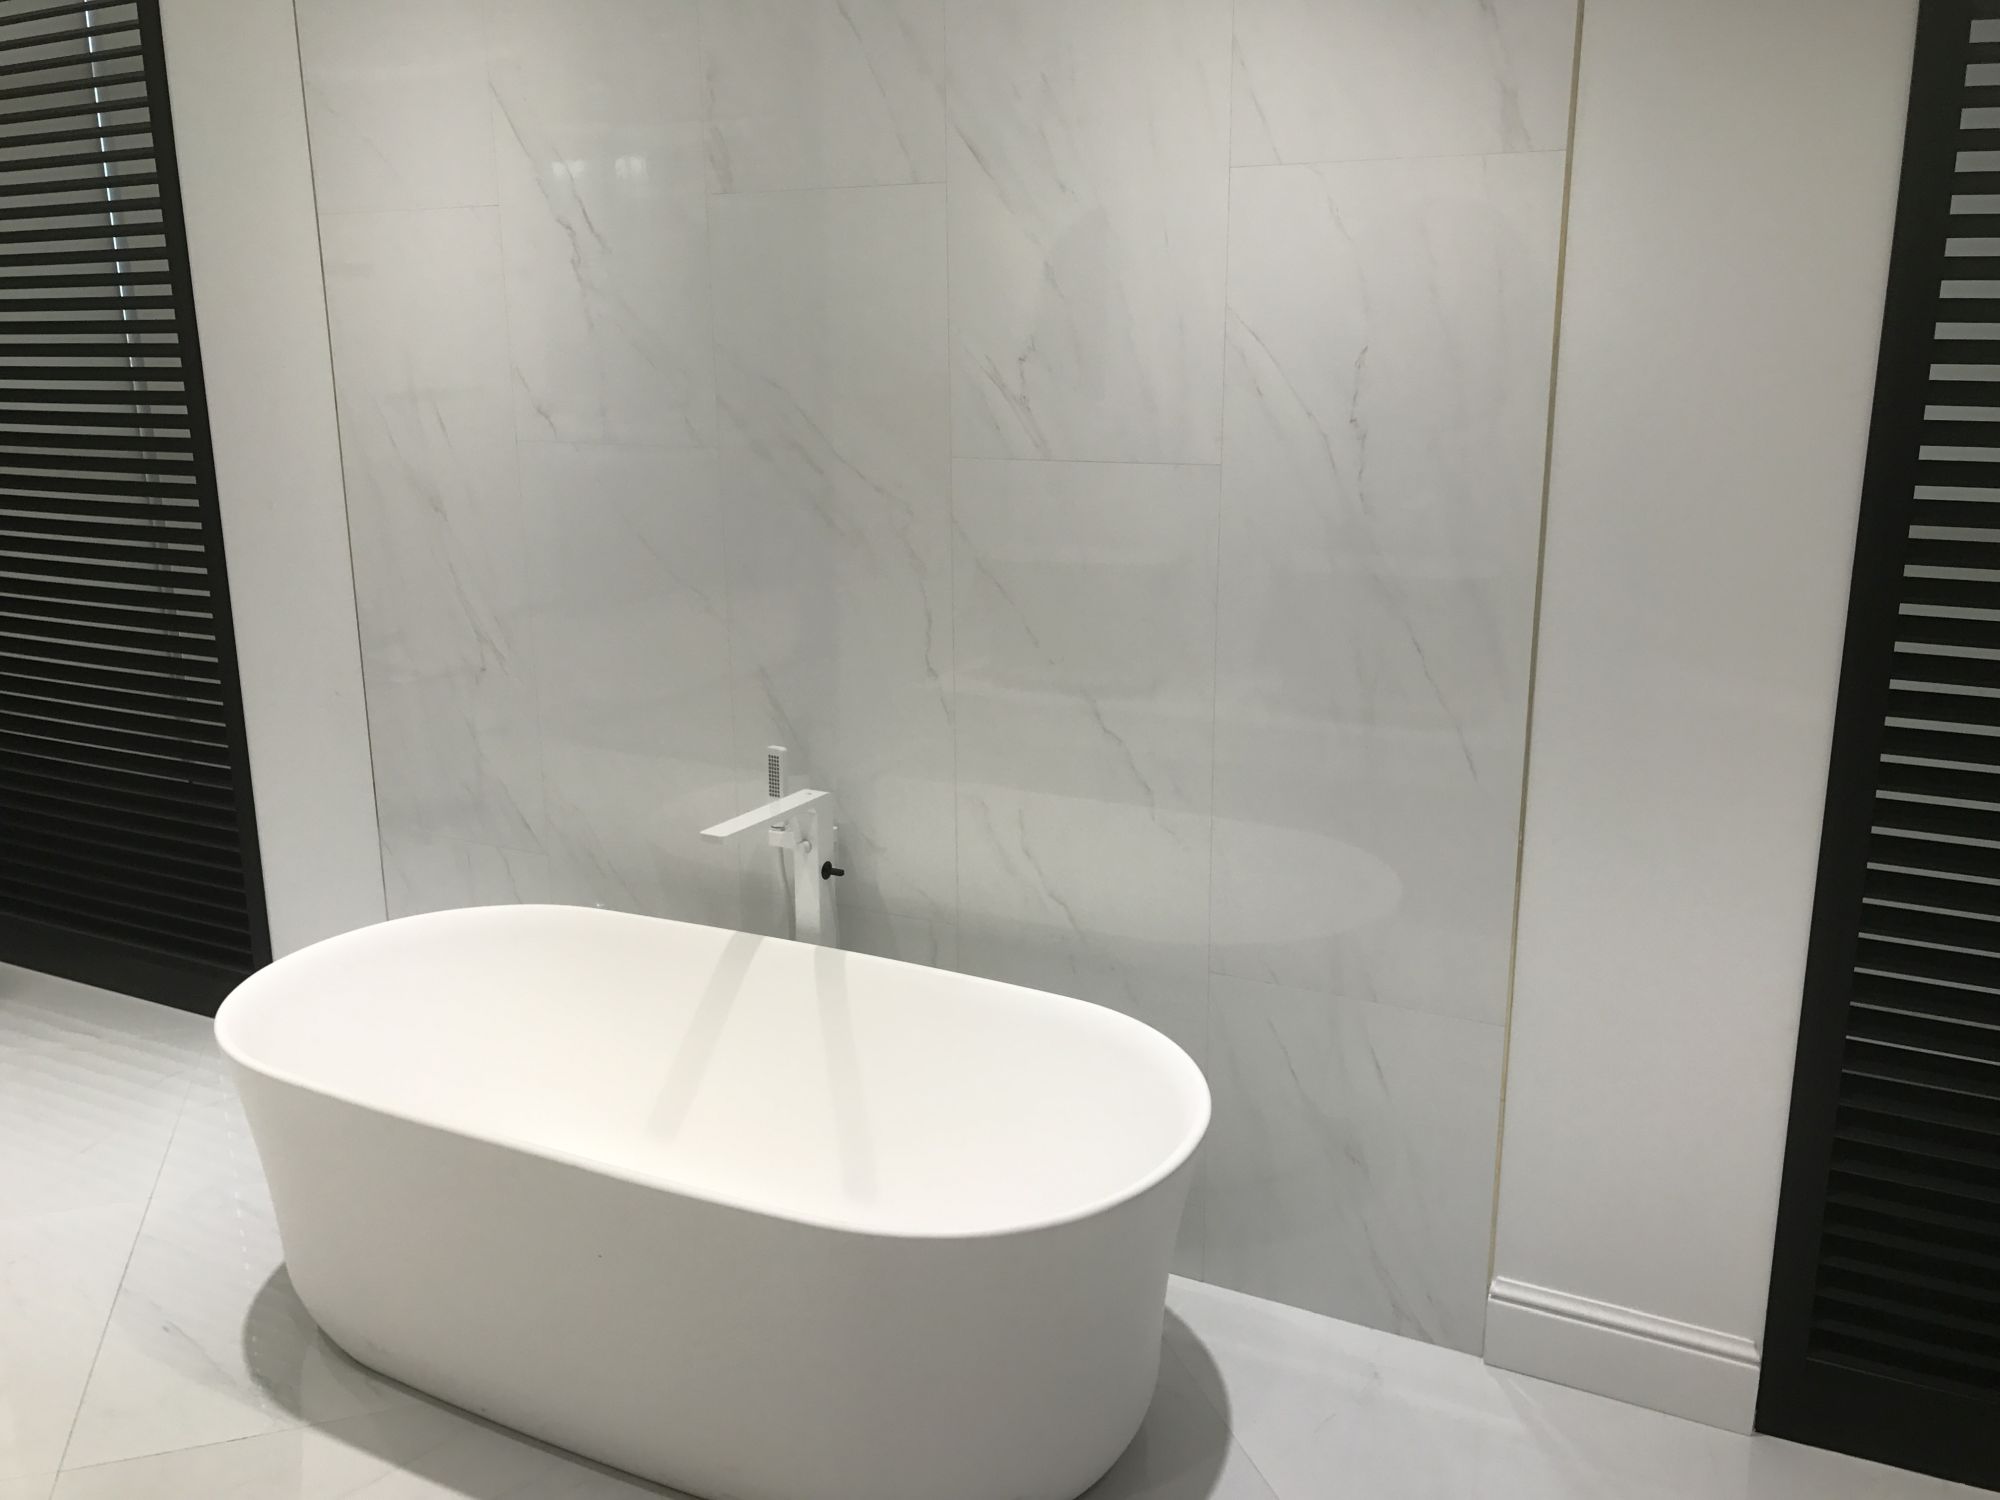 Marble looking wall tiles with white shaped round bath tub by Porcelanosa